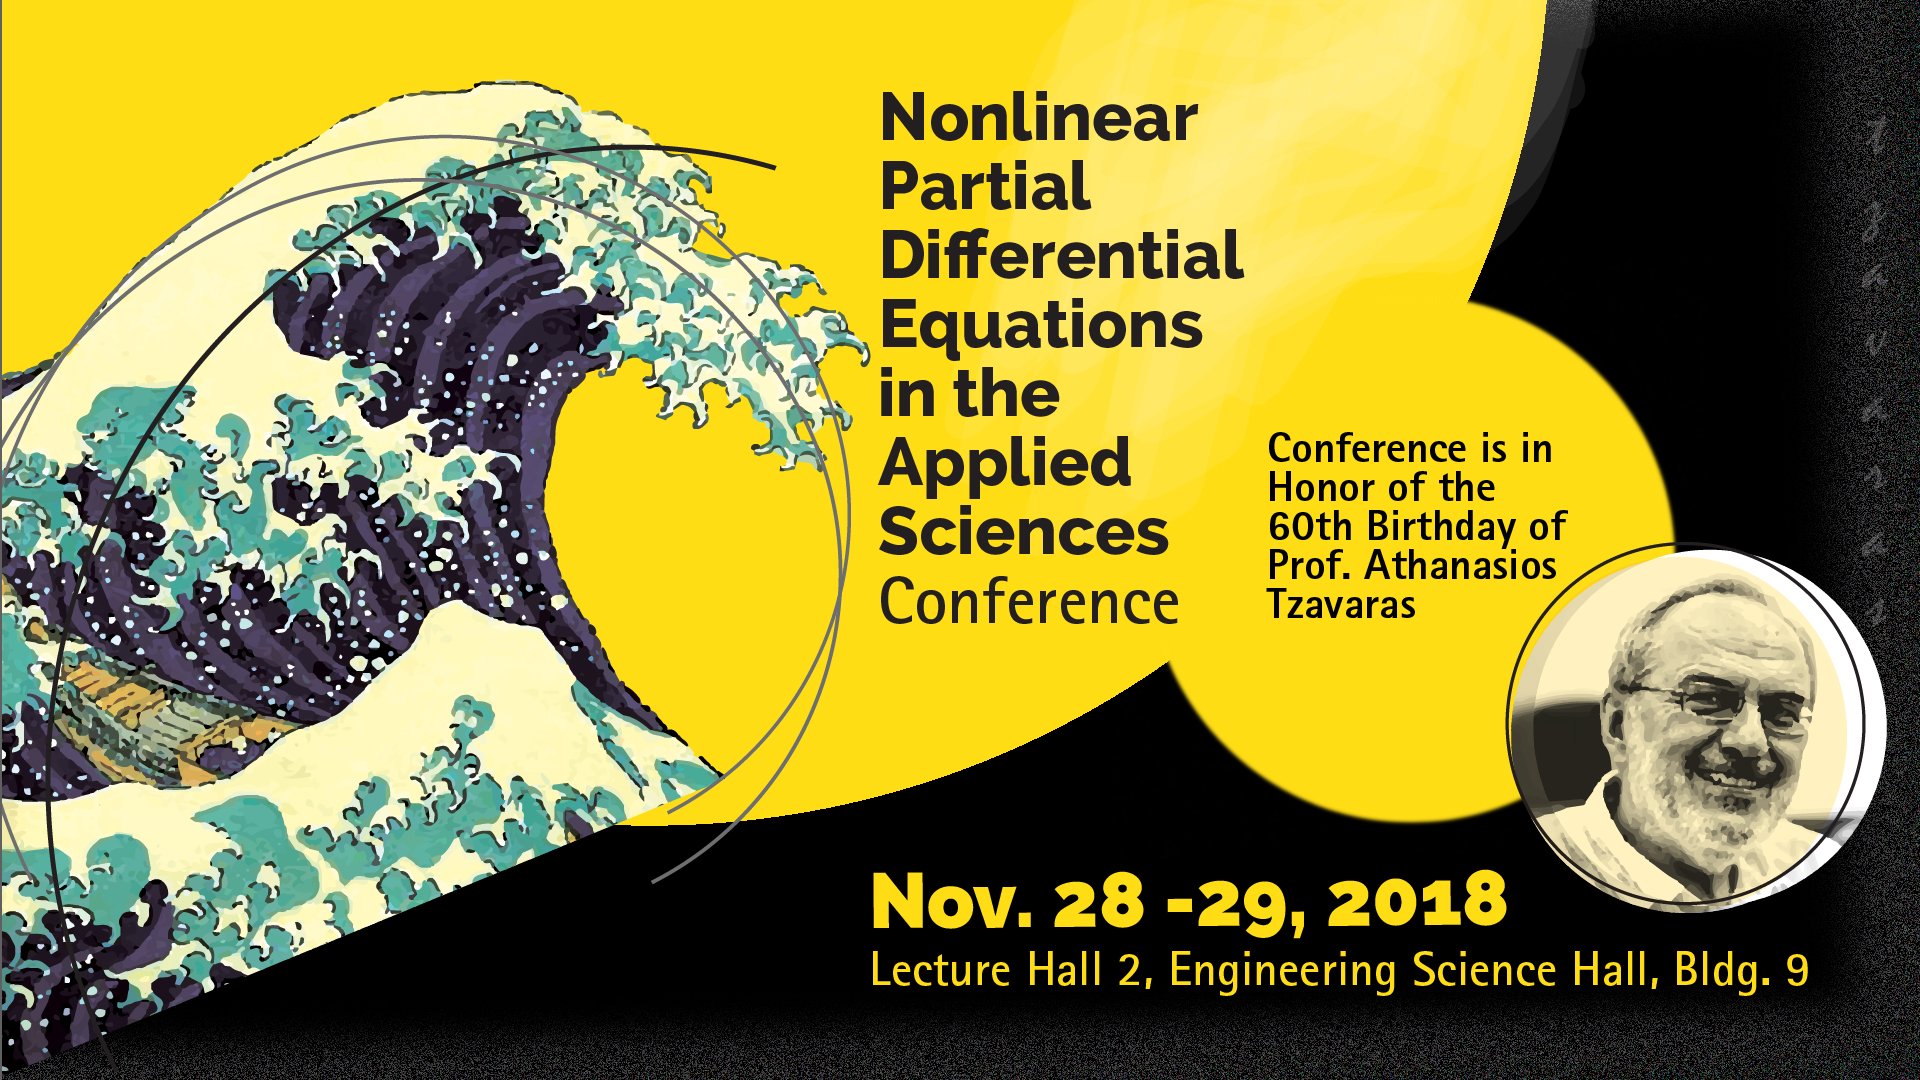 Athanasios-Tzavaras-Nonlinear-Partial-Differential-Equations-in-the-Applied-Sciences-Conference-2018